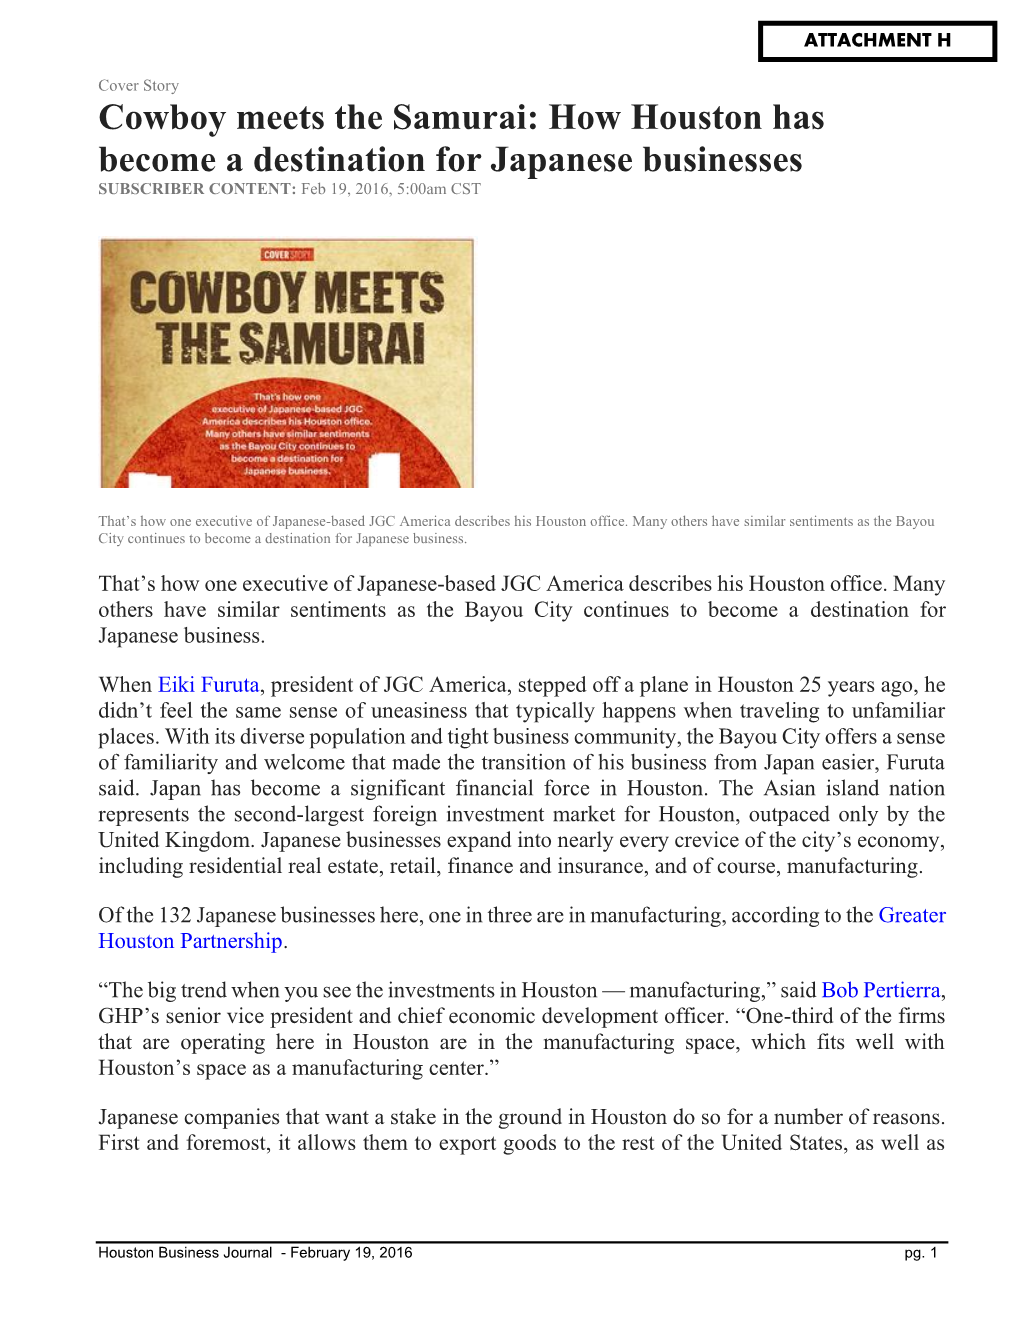 How Houston Has Become a Destination for Japanese Businesses SUBSCRIBER CONTENT: Feb 19, 2016, 5:00Am CST